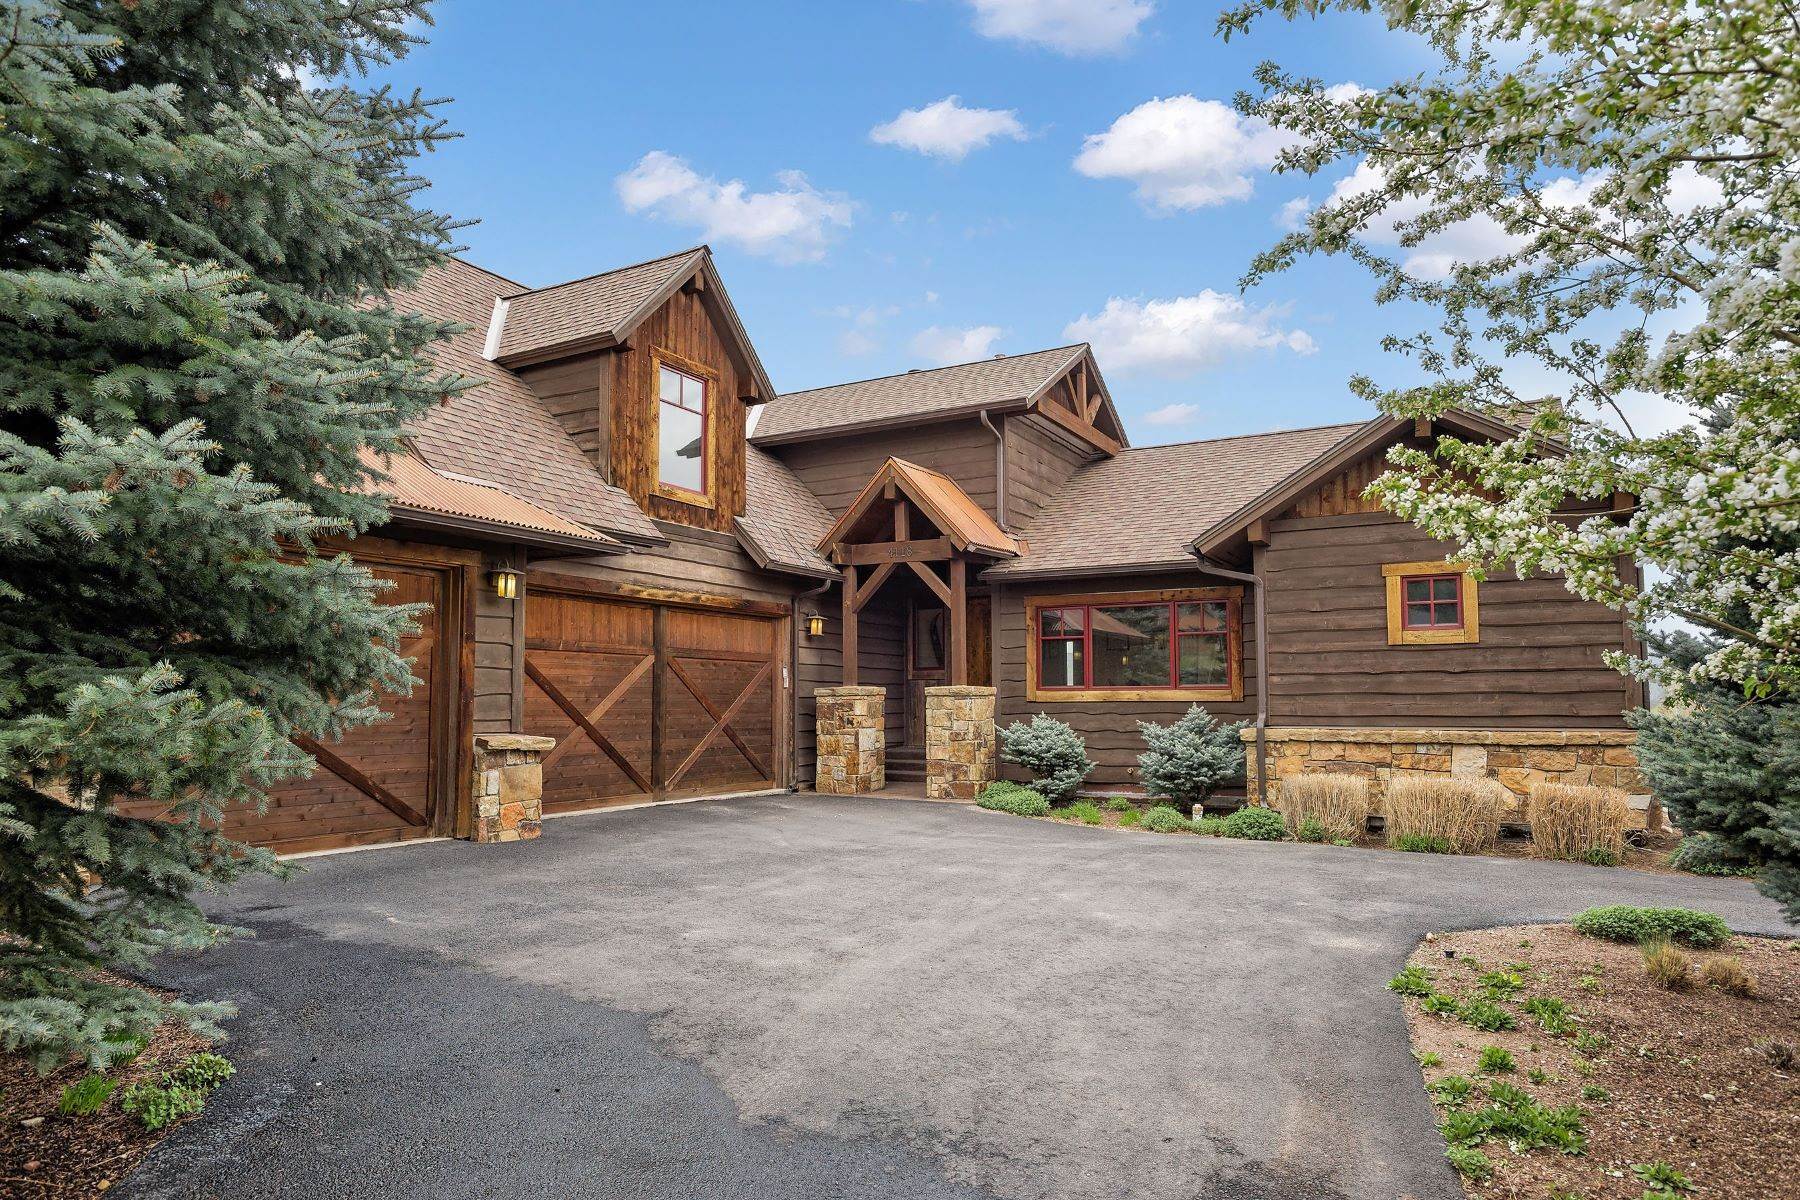 Single Family Homes for Active at Sophisticated River Valley Ranch Home 4118 Crystal Bridge Dr Carbondale, Colorado 81623 United States